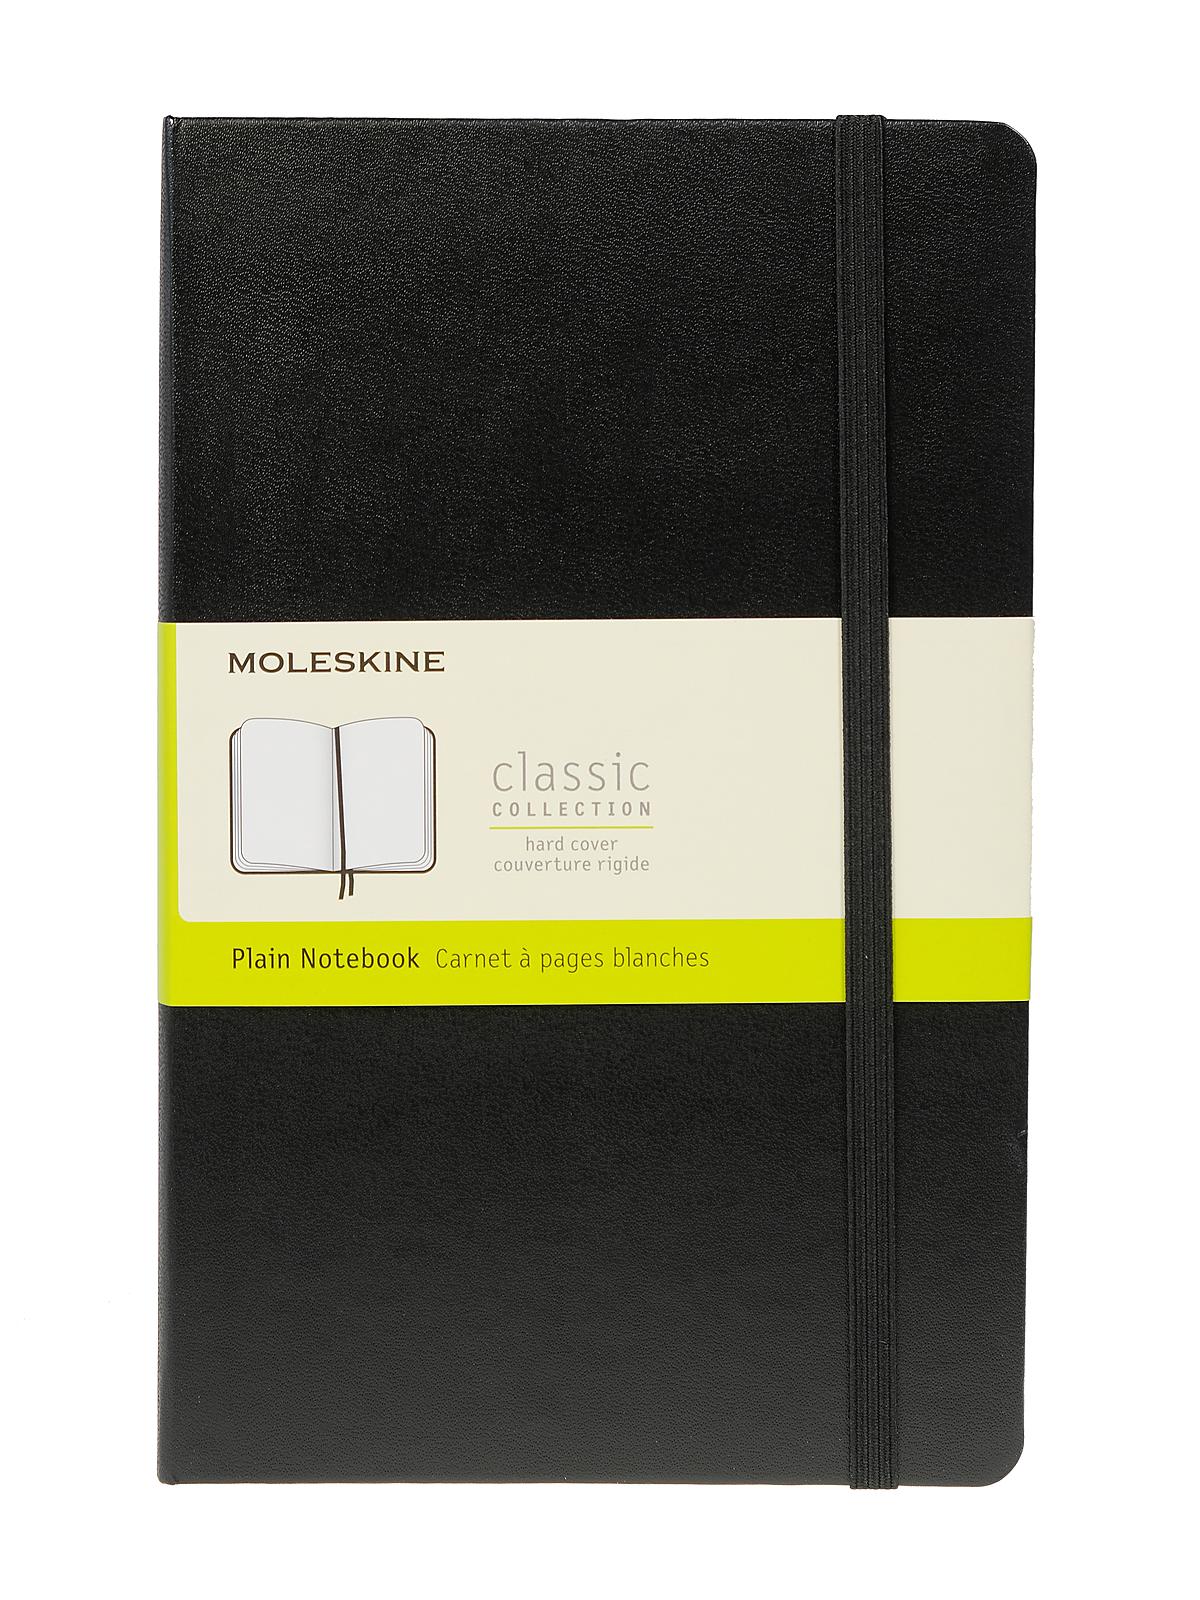 Classic Hard Cover Notebooks Black 5 In. X 8 1 4 In. 400 Pages, Unlined